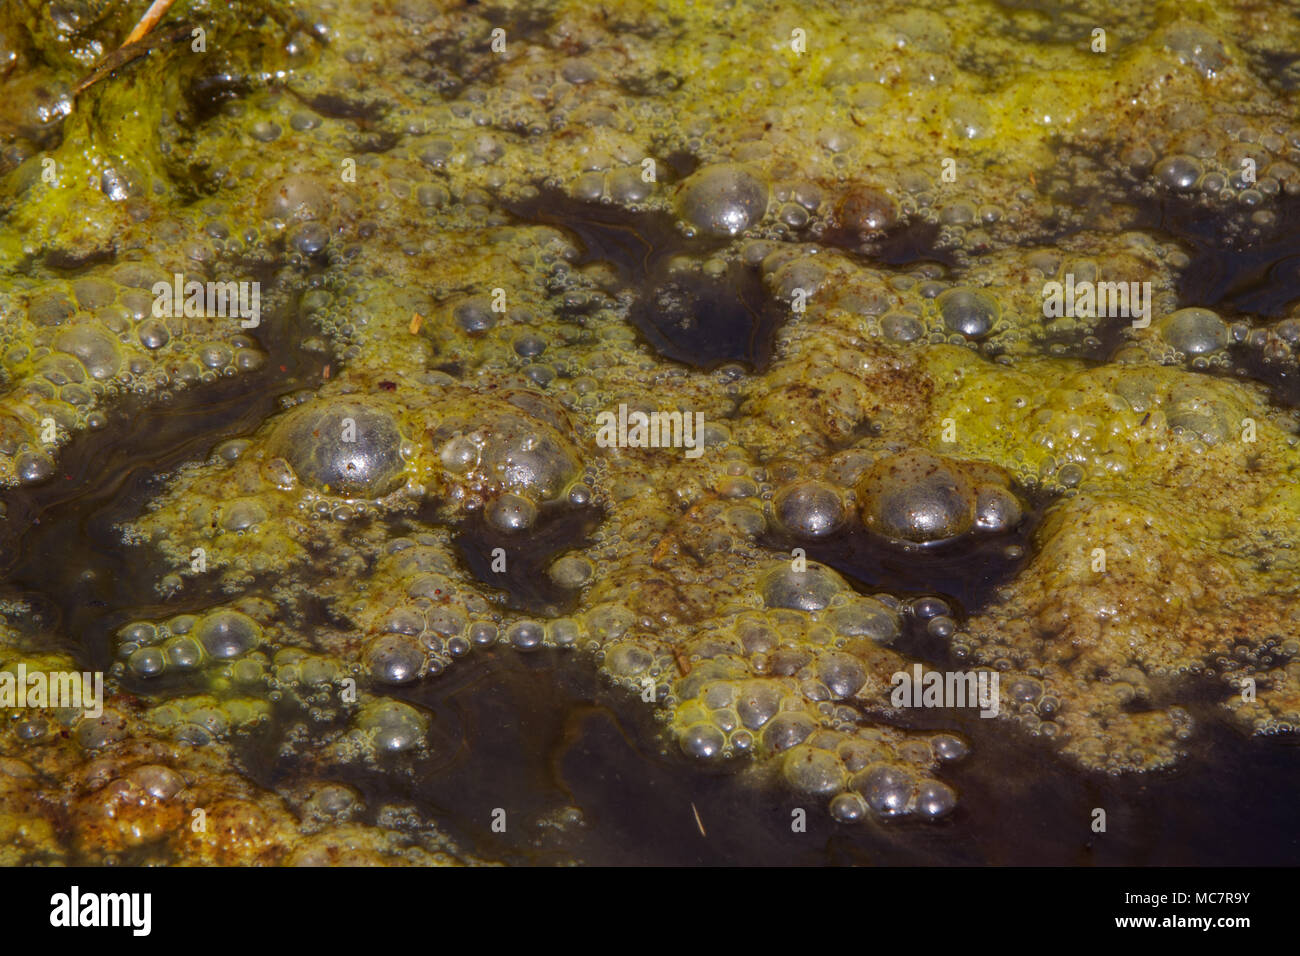 Dense covering of bright green algae with trapped gas bubbles floating on dark water Stock Photo